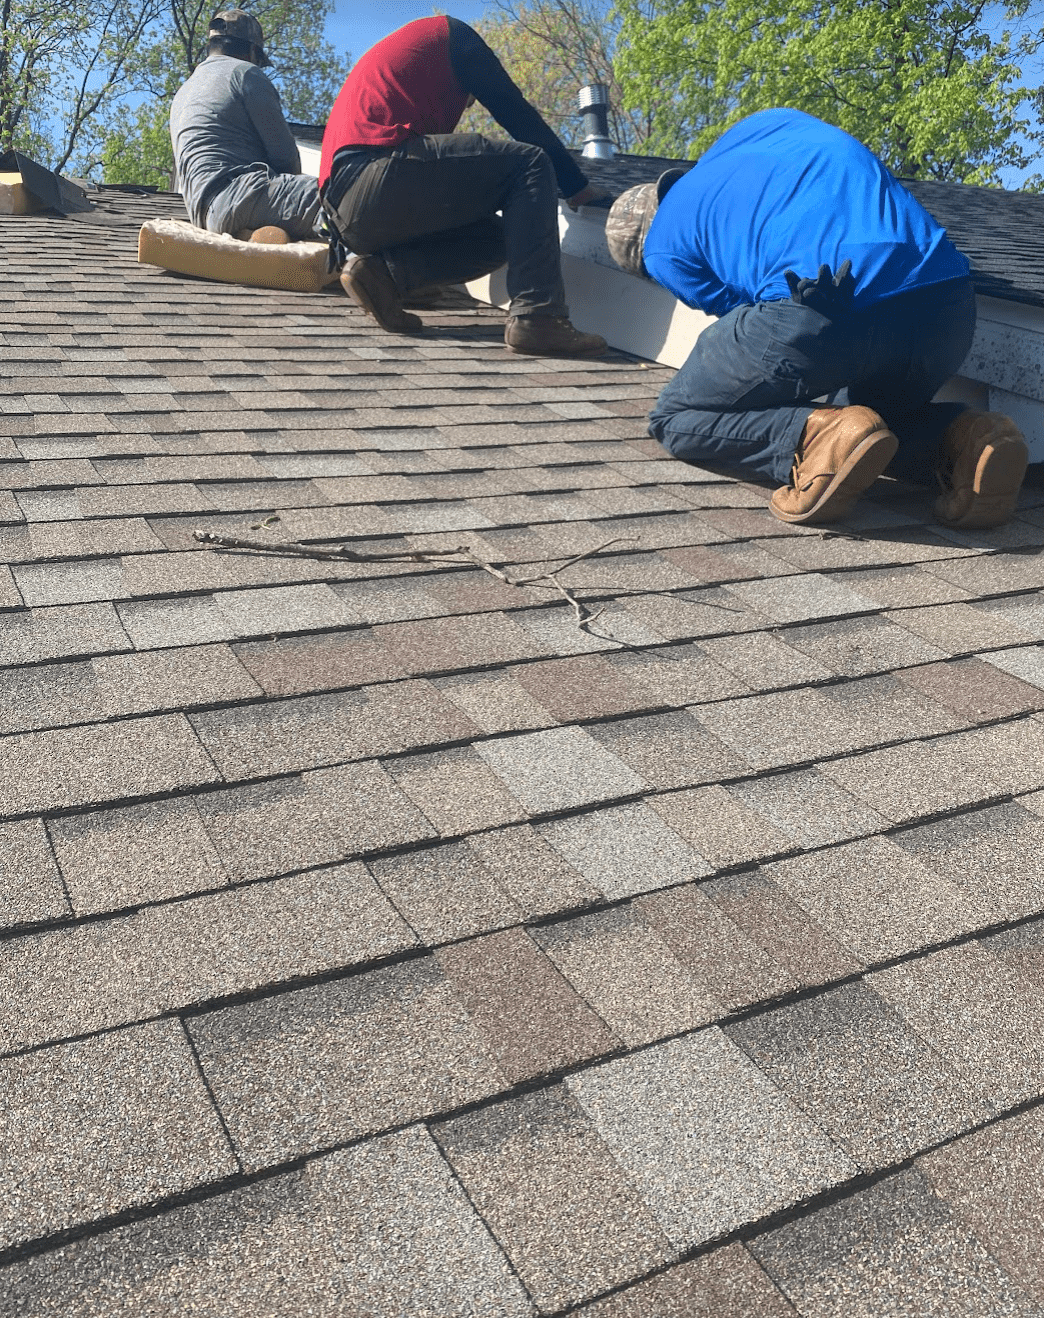 driftwood shingles in Indianapolis trudefinition duration Owens corning